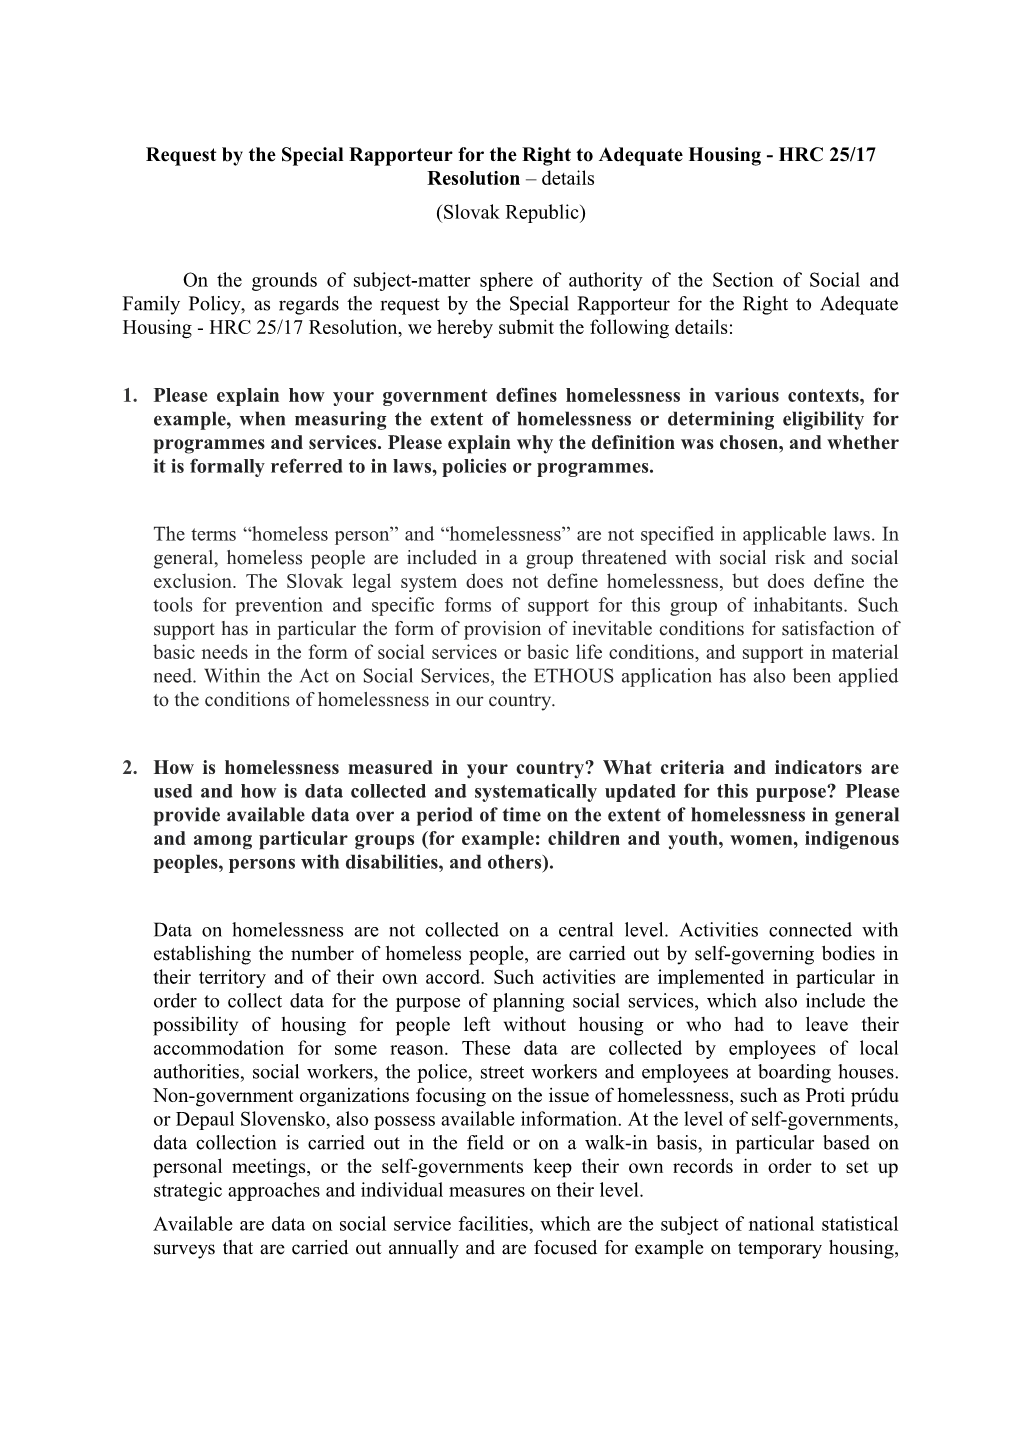 Request by Thespecial Rapporteur for the Right to Adequate Housing - HRC 25/17 Resolution